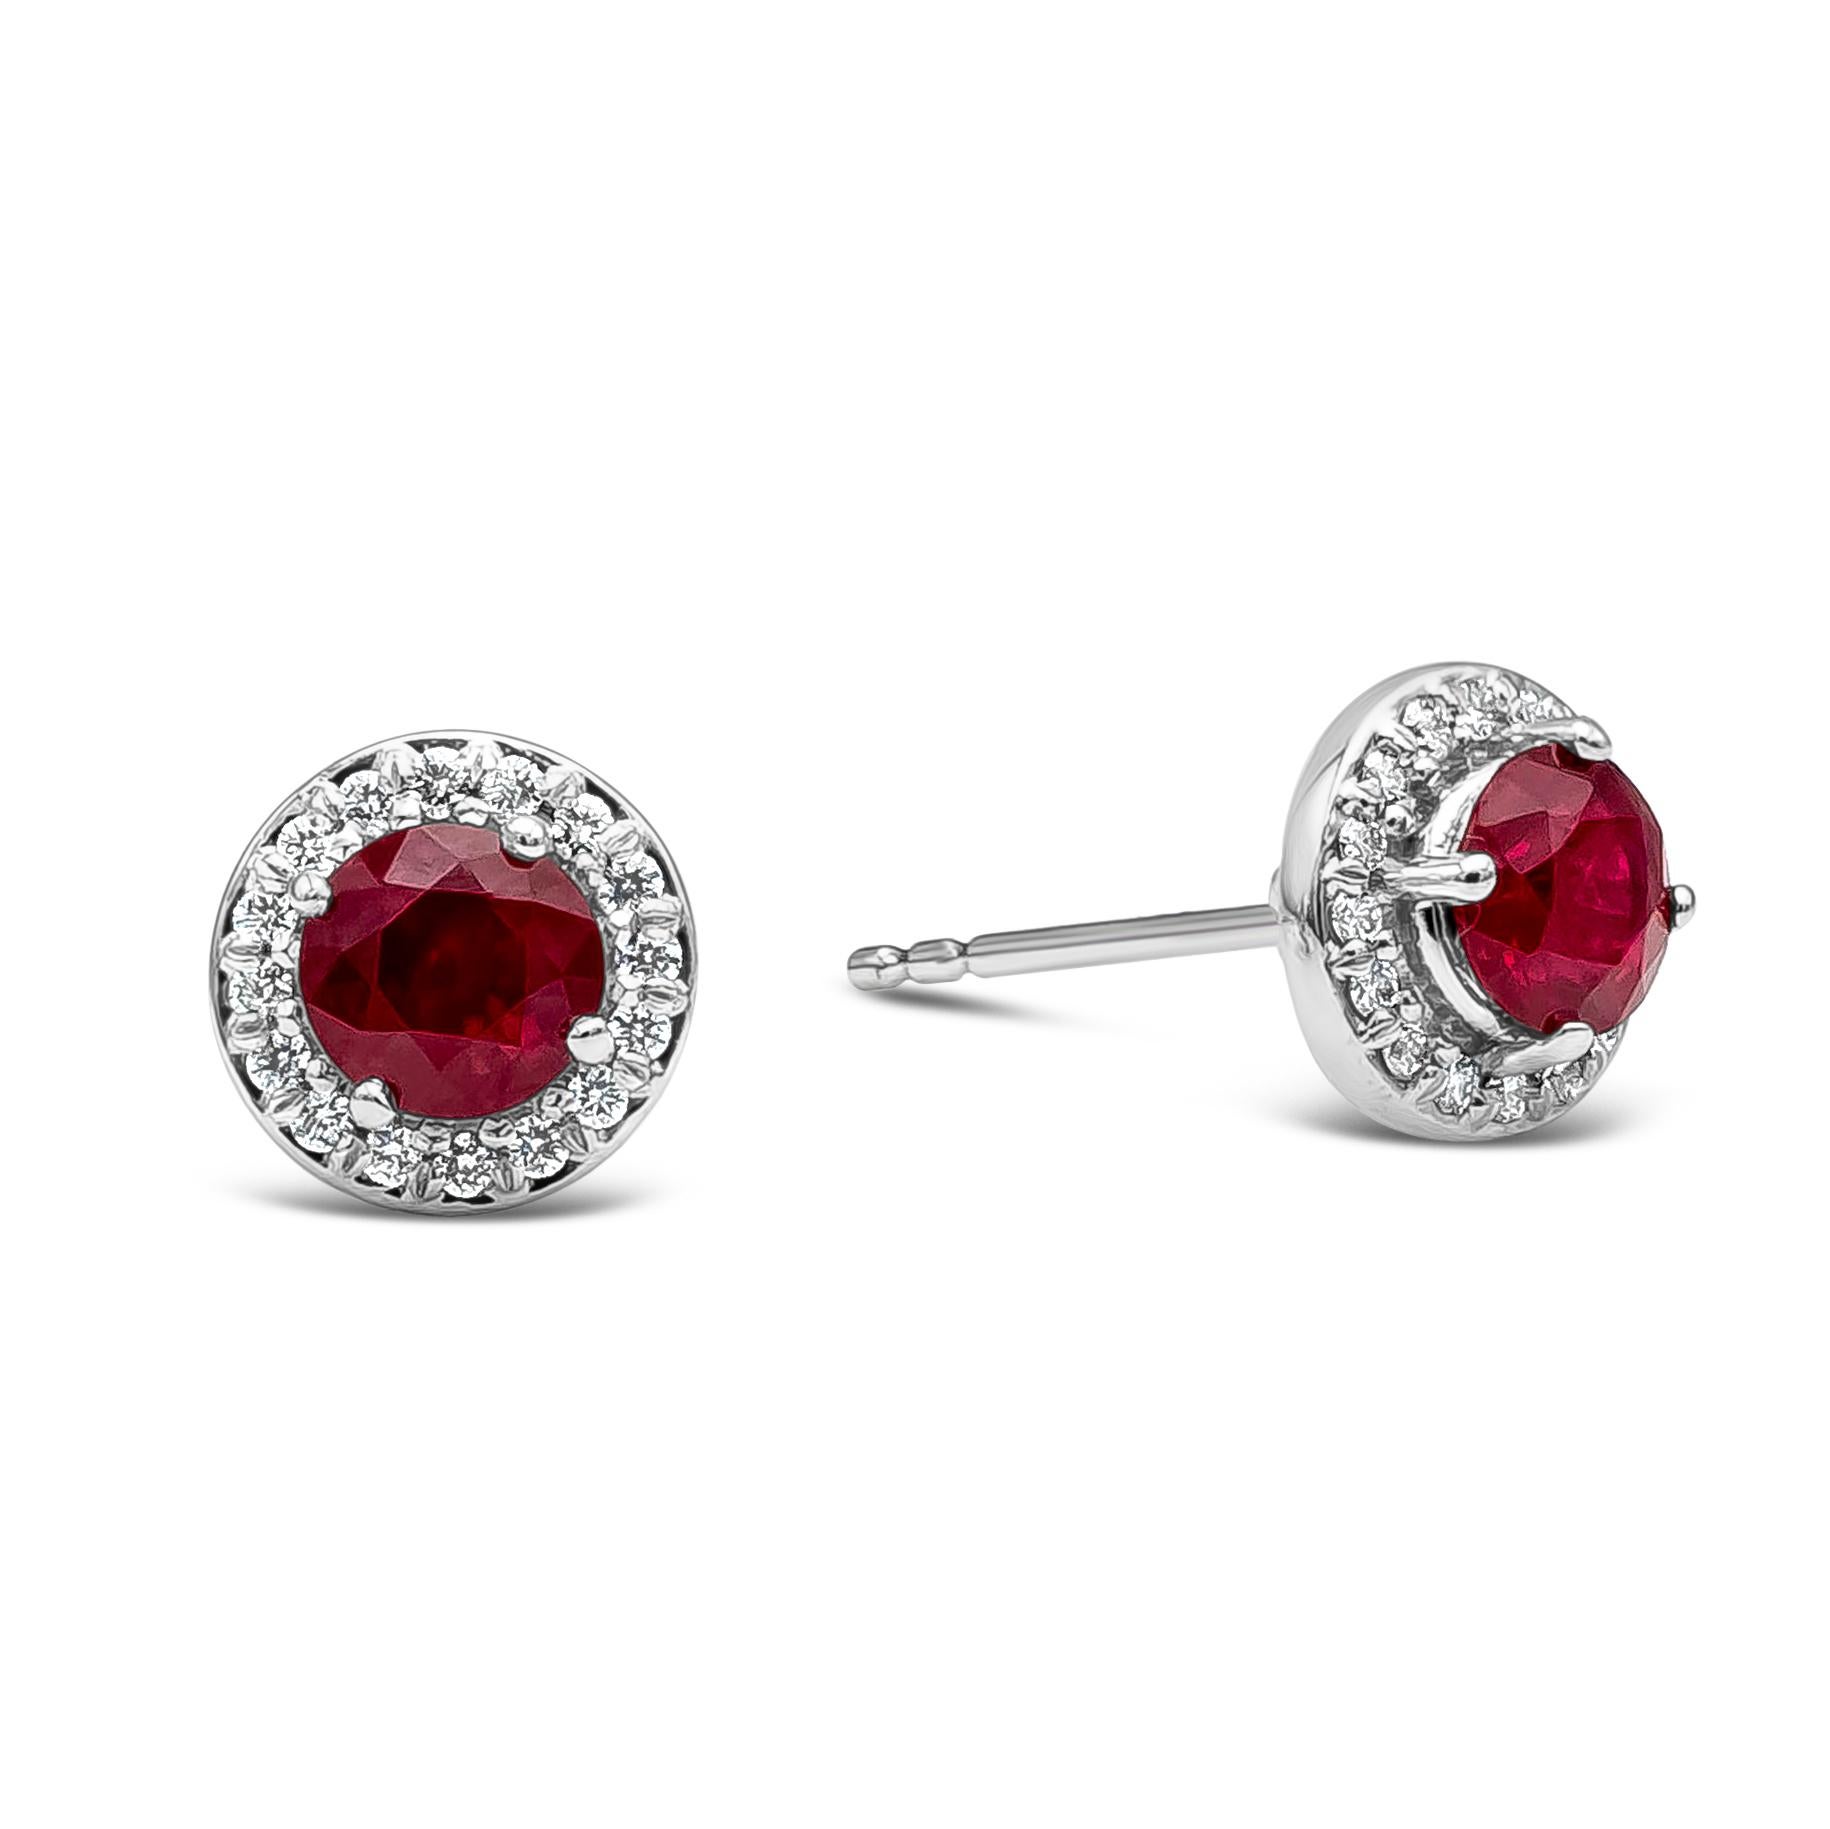 A simple and versatile pair of stud earrings, showcasing vibrant 1.21 carats total of round rubies surrounded by a single row of brilliant round diamonds weighing 0.14 carats with F color and VS clarity. Set on 18K white gold.

Roman Malakov is a